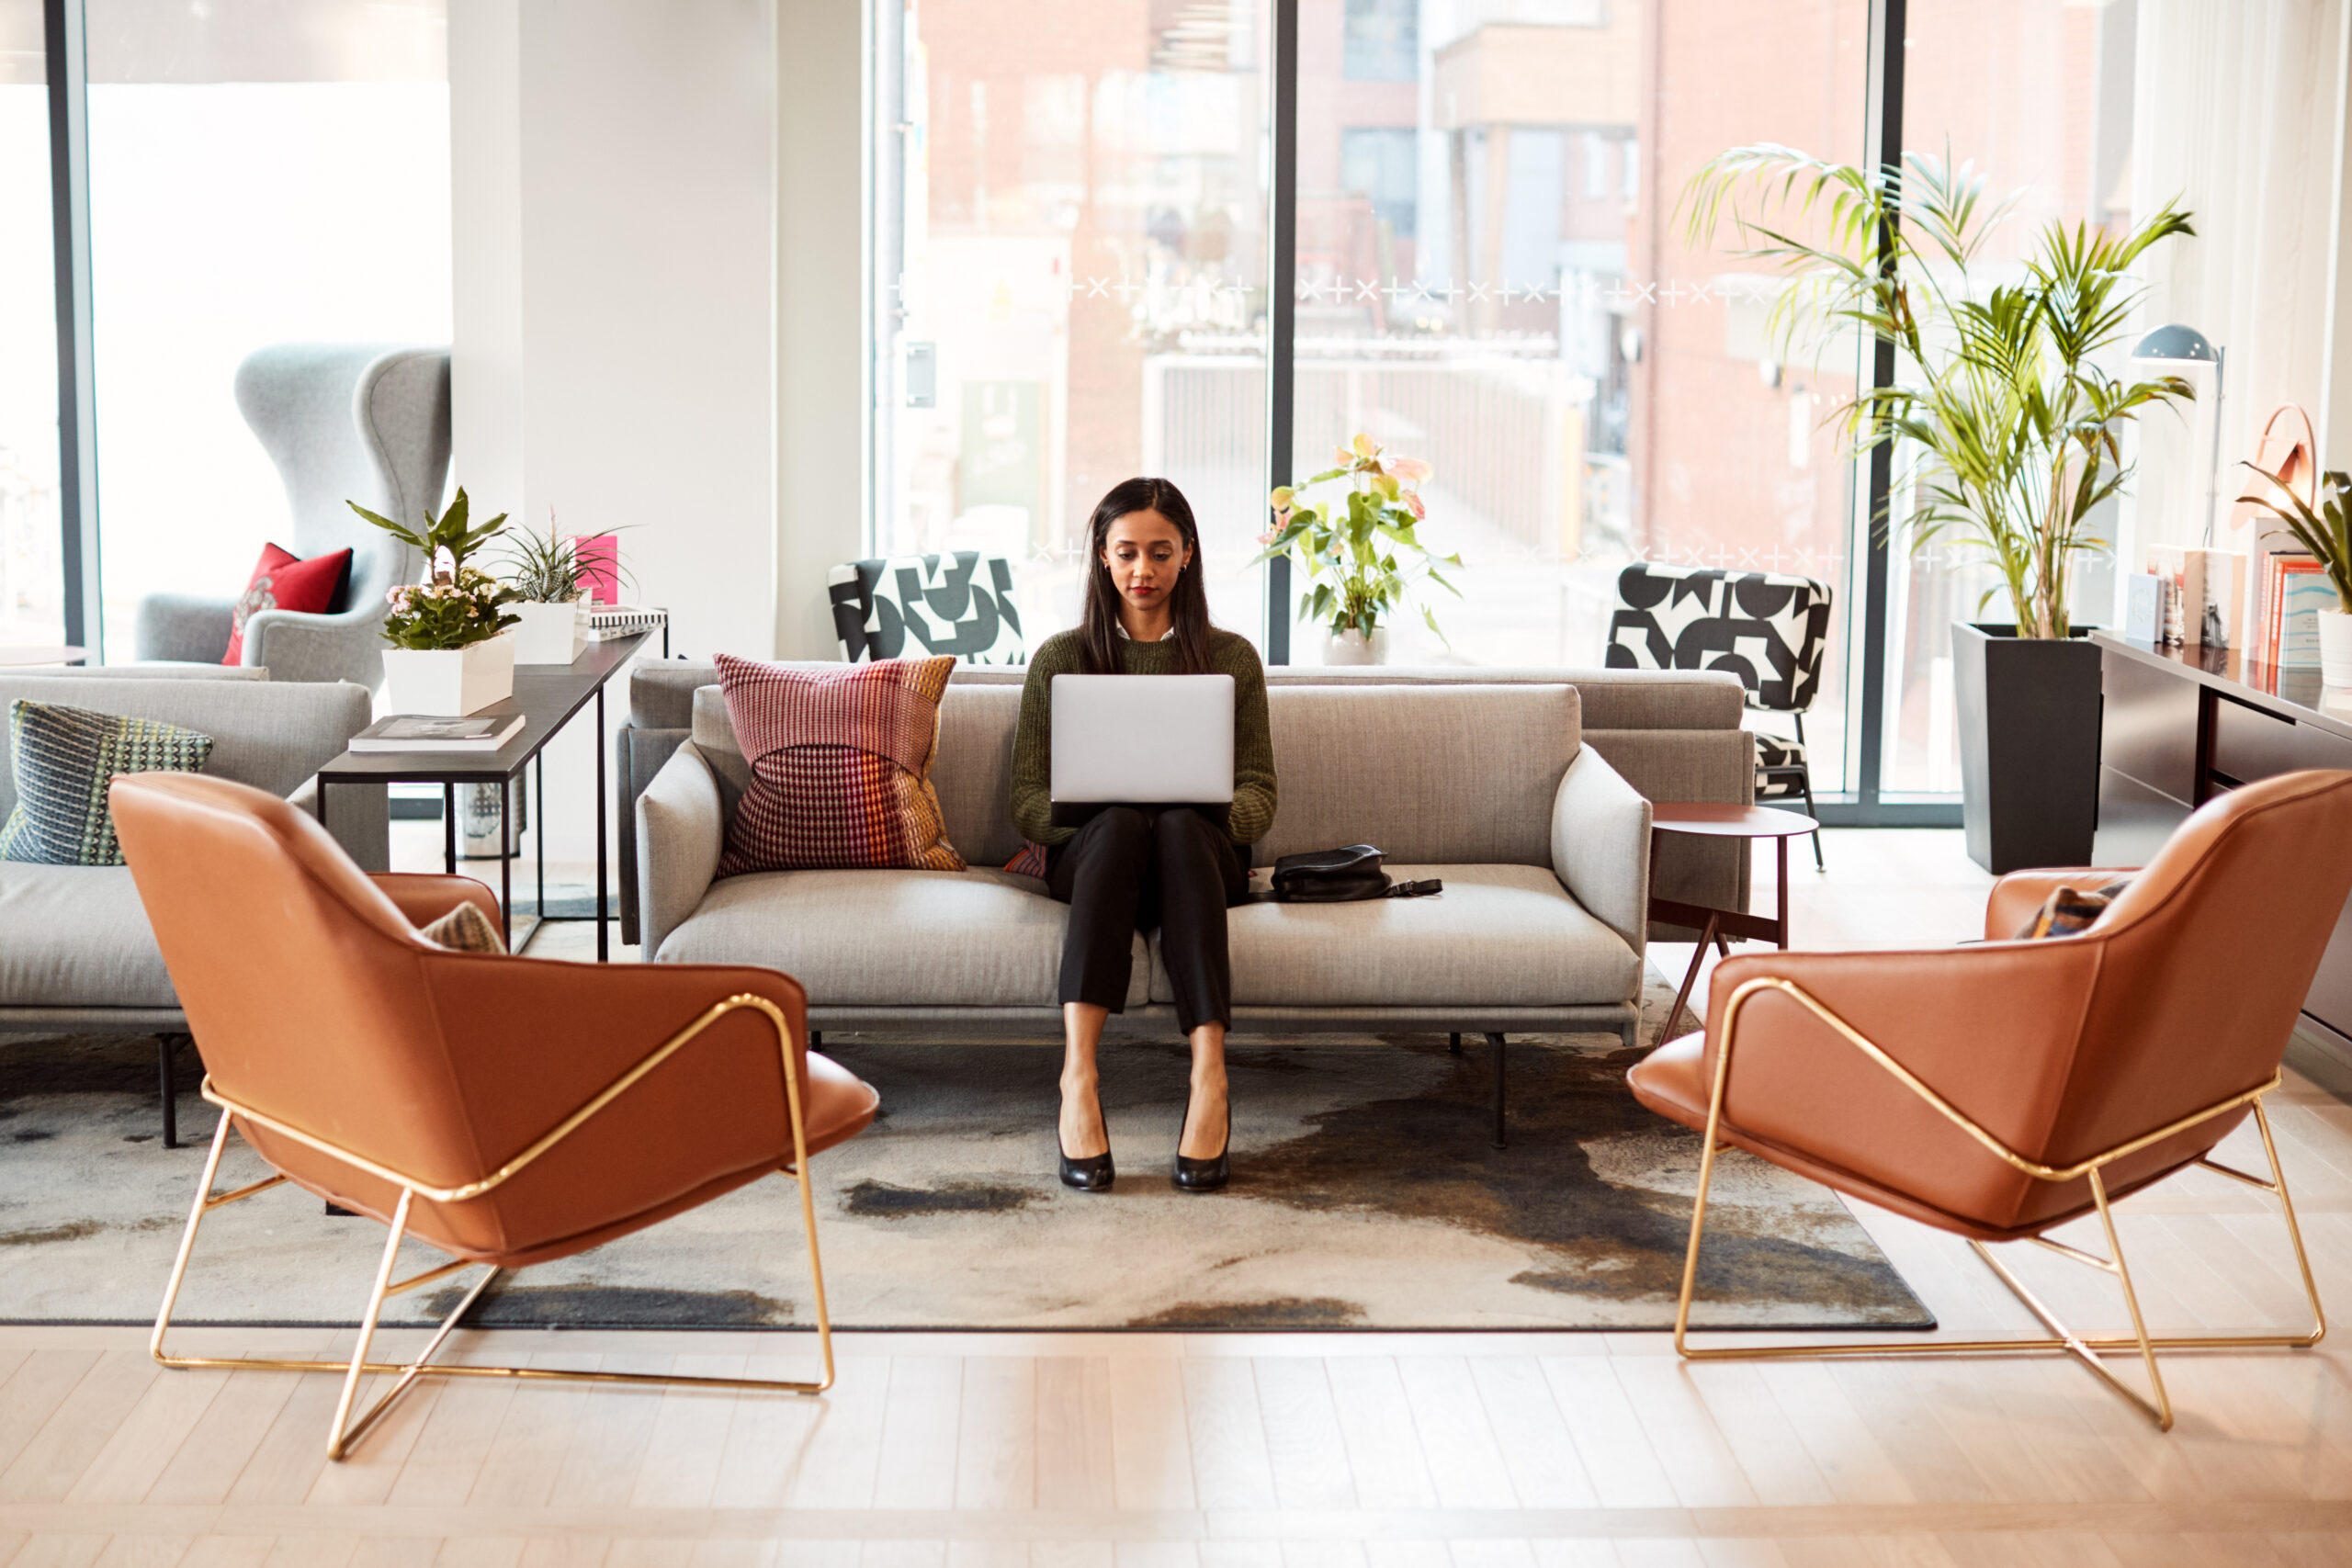 Is flexible working right for your business?